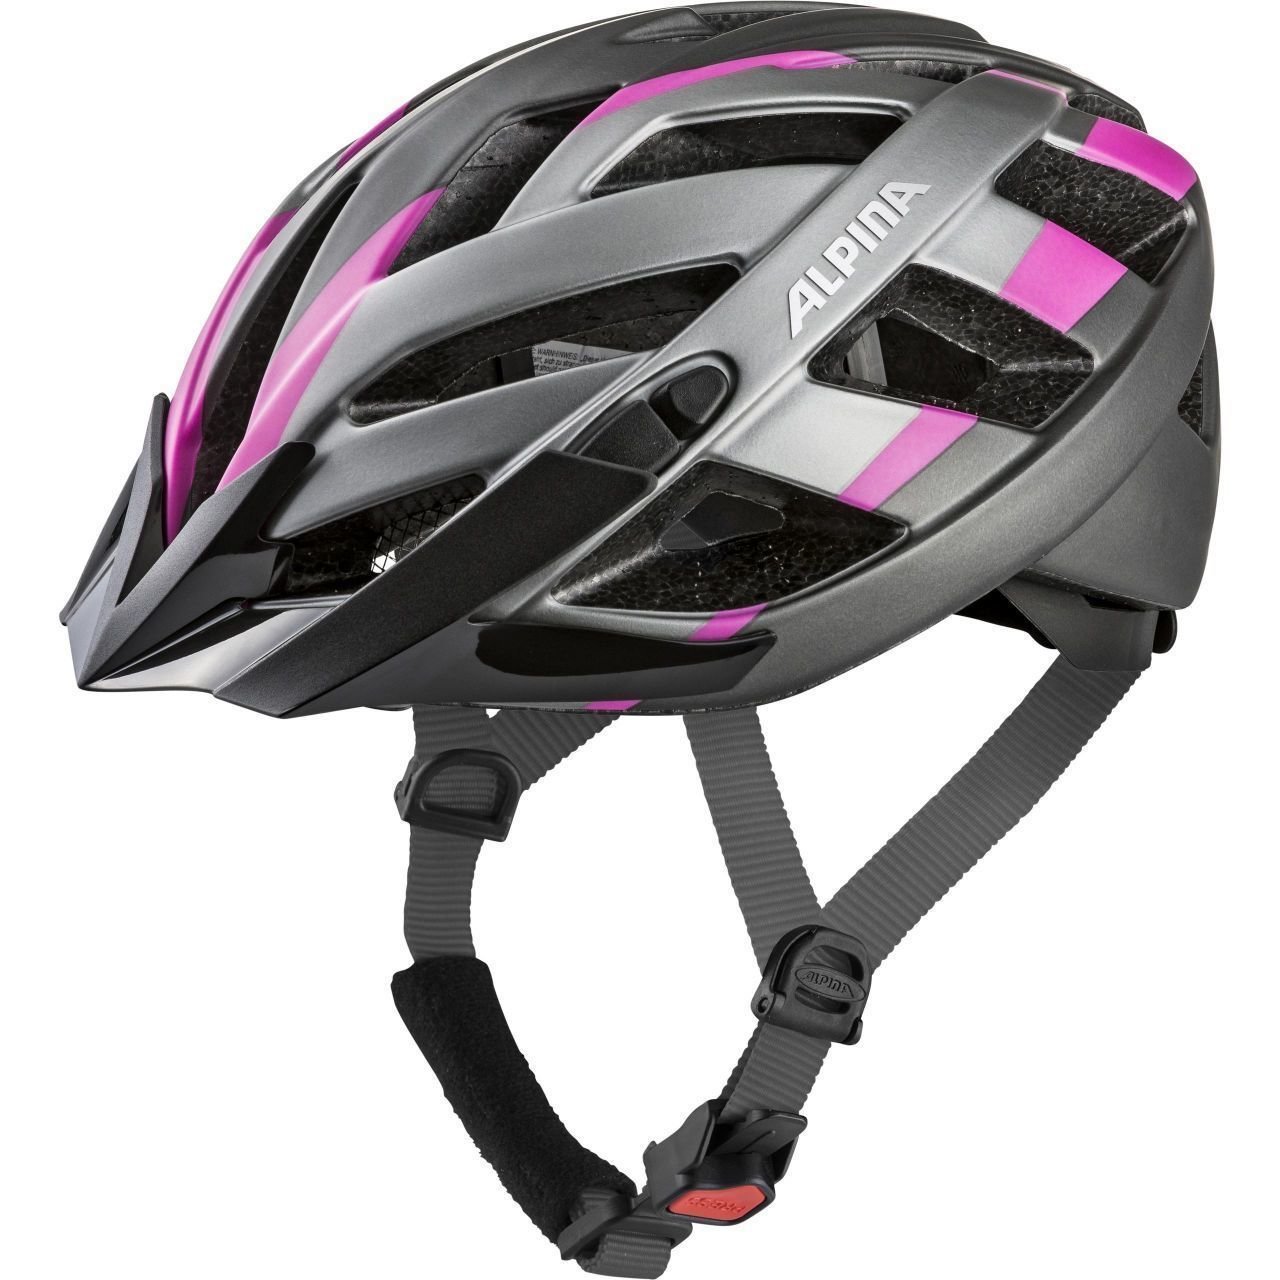 Kask rowerowy Alpina Panoma 2.0 L.E. Titanium/Pink 52-57 Kask rowerowy